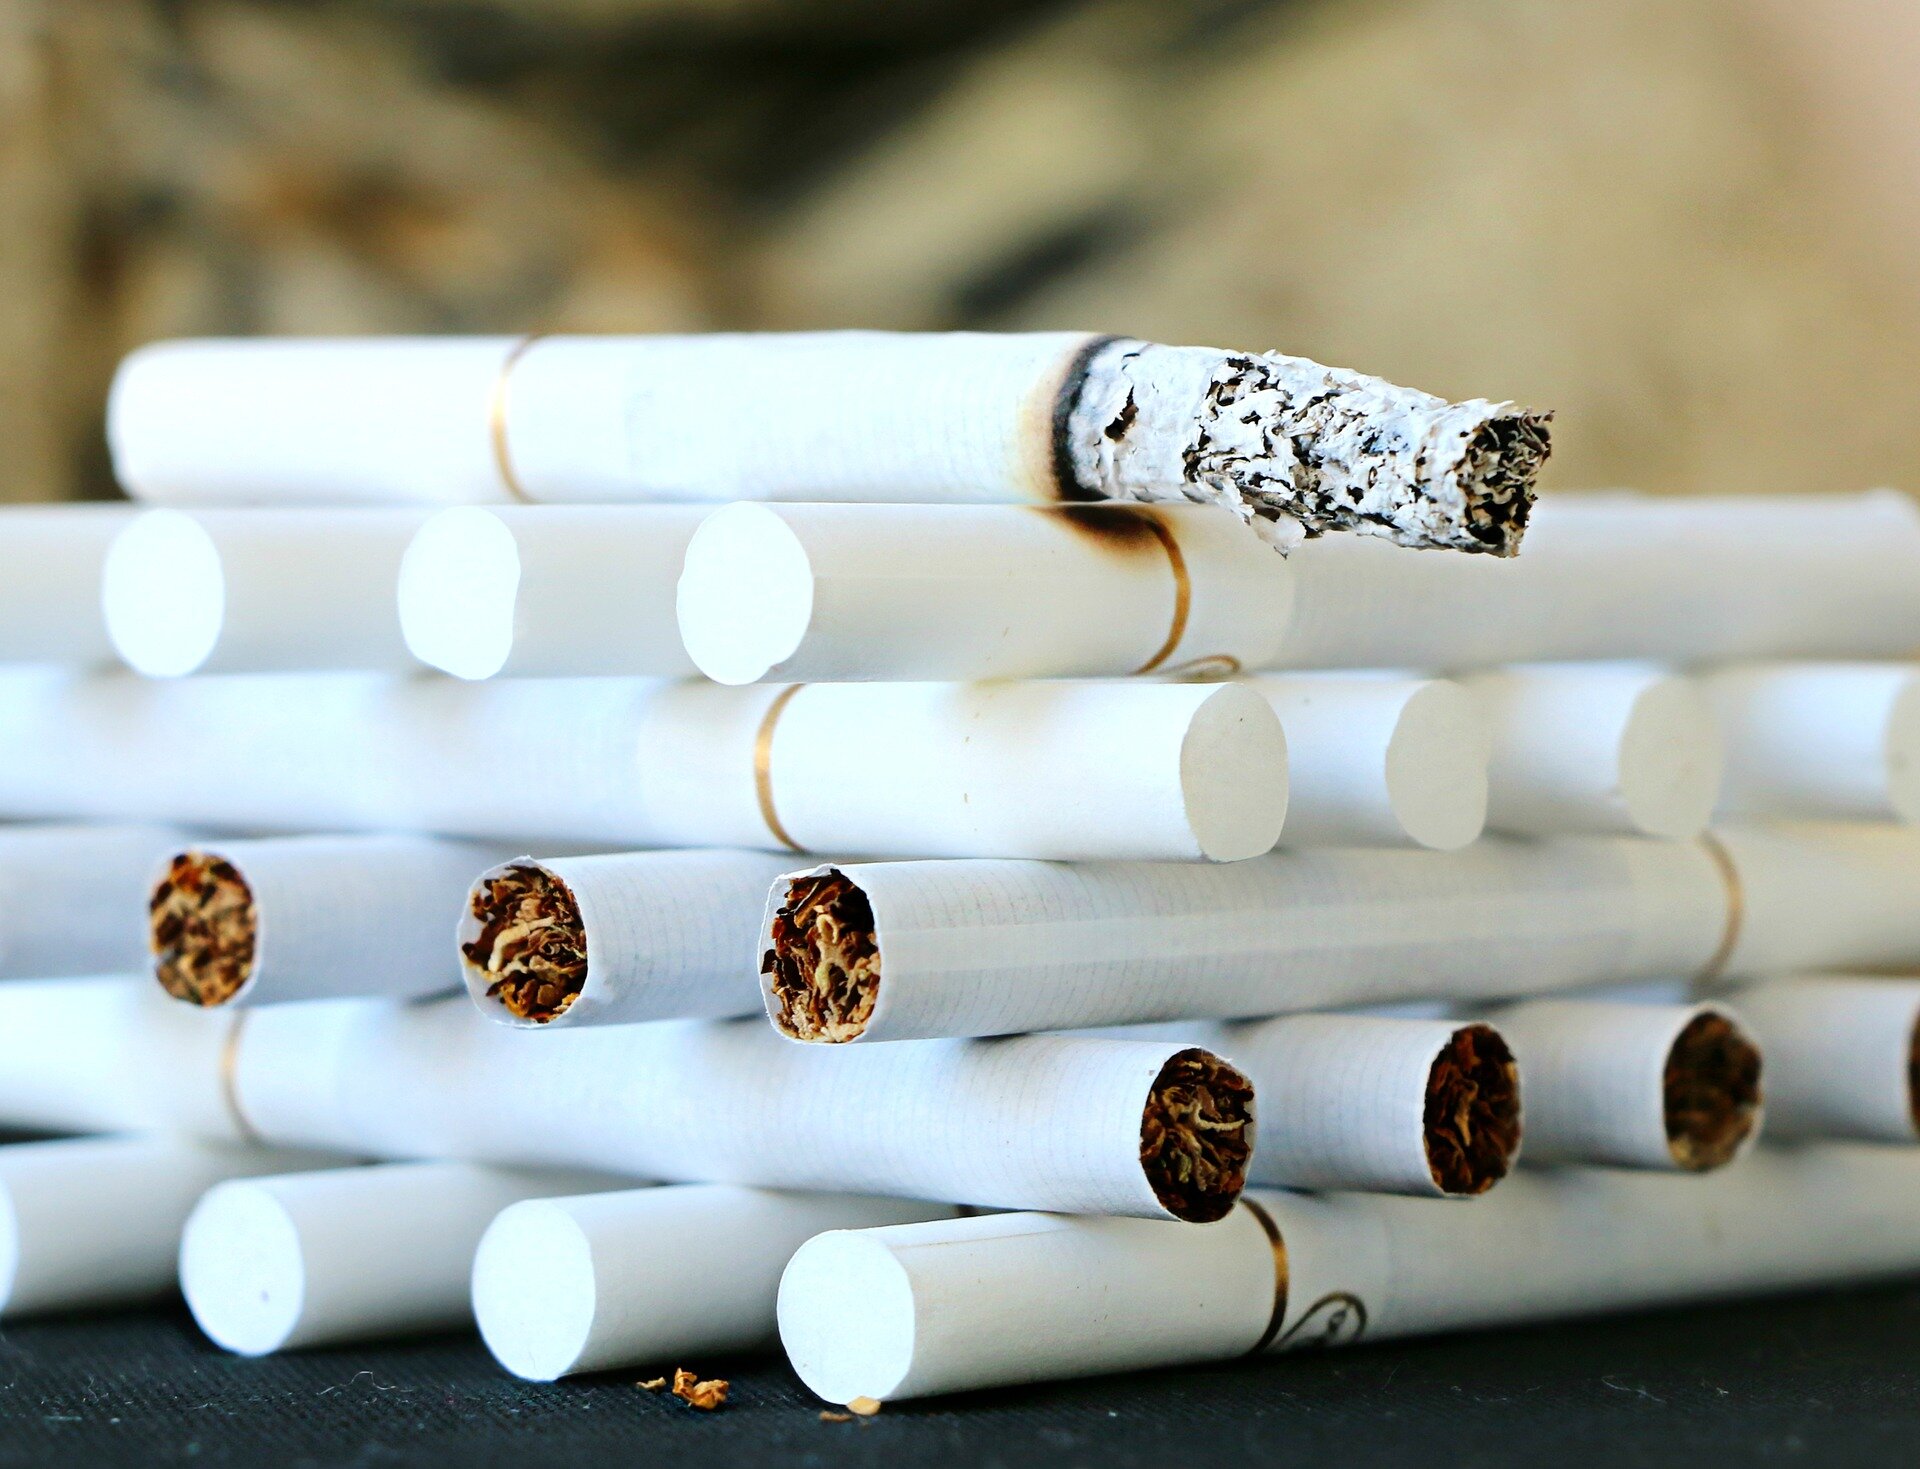 FDA says it will finalize ban on menthol tobacco products 'in coming  months